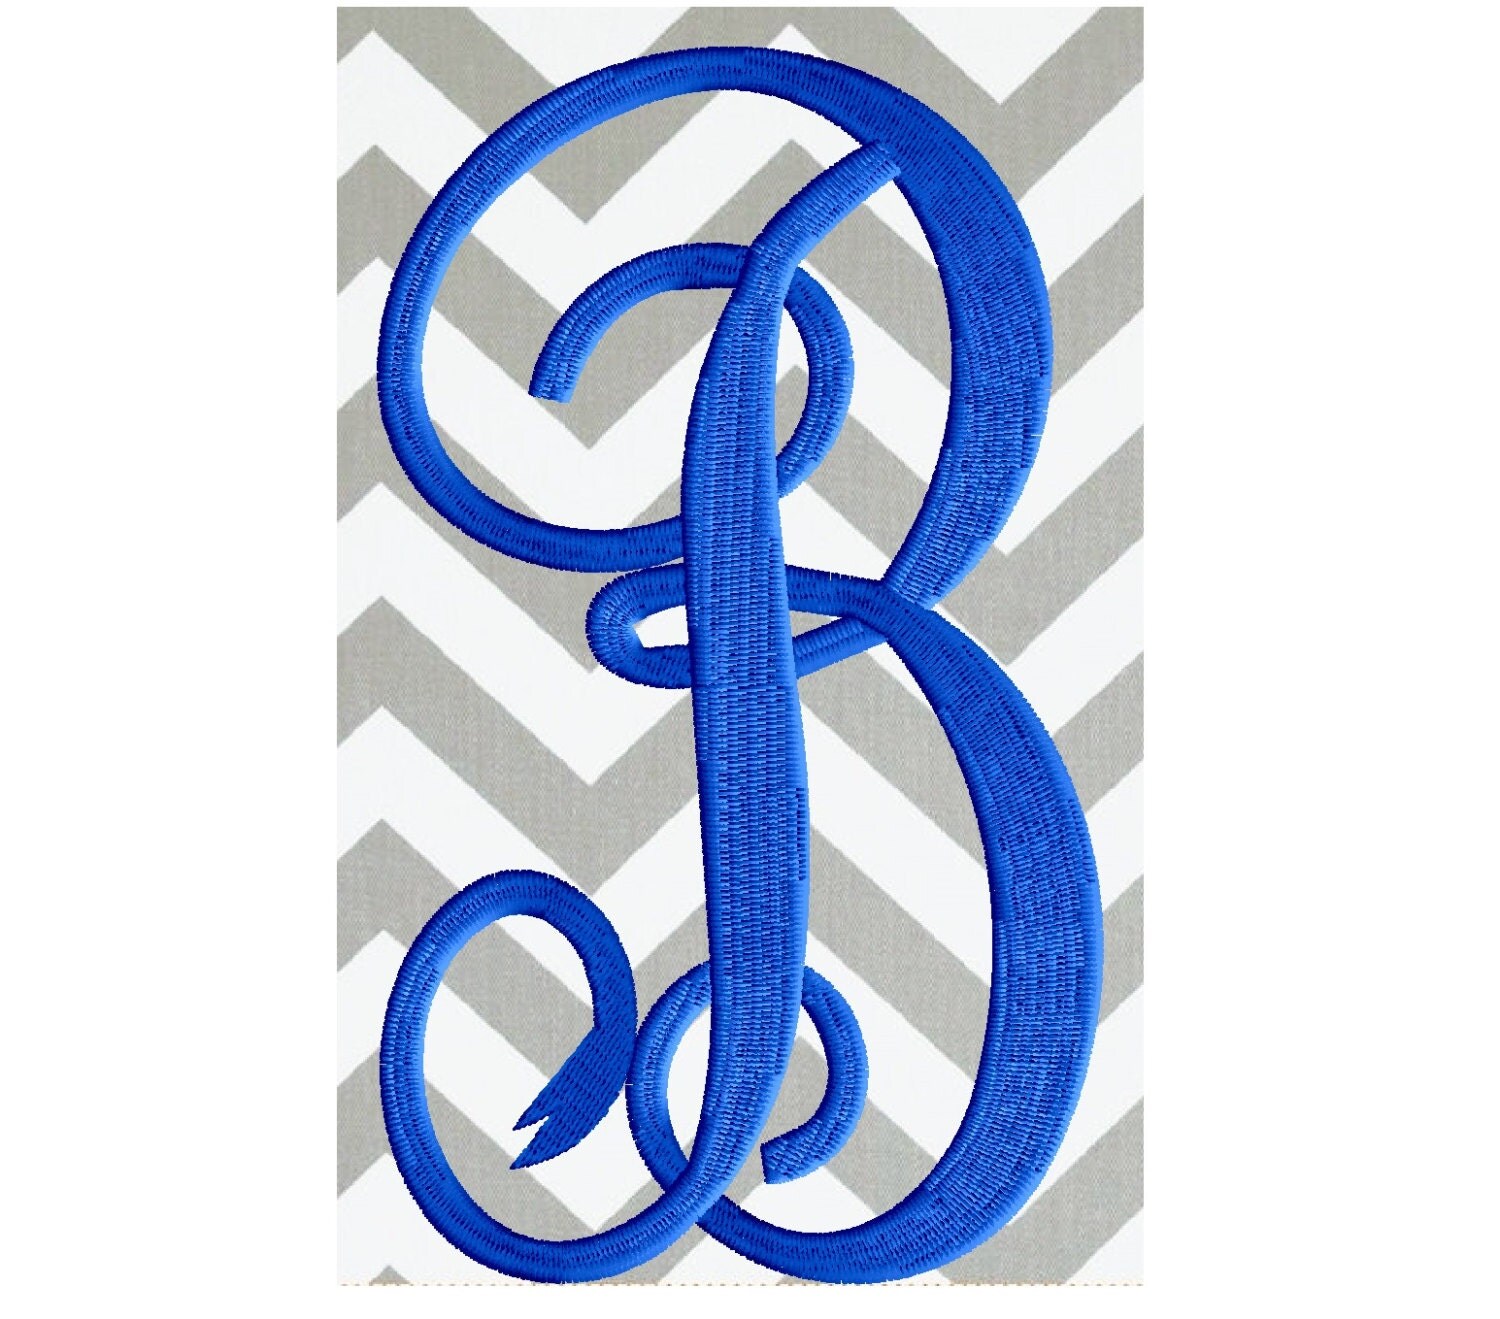 Extra Large 5 inch tall Scripty Monogram Font Embroidery File